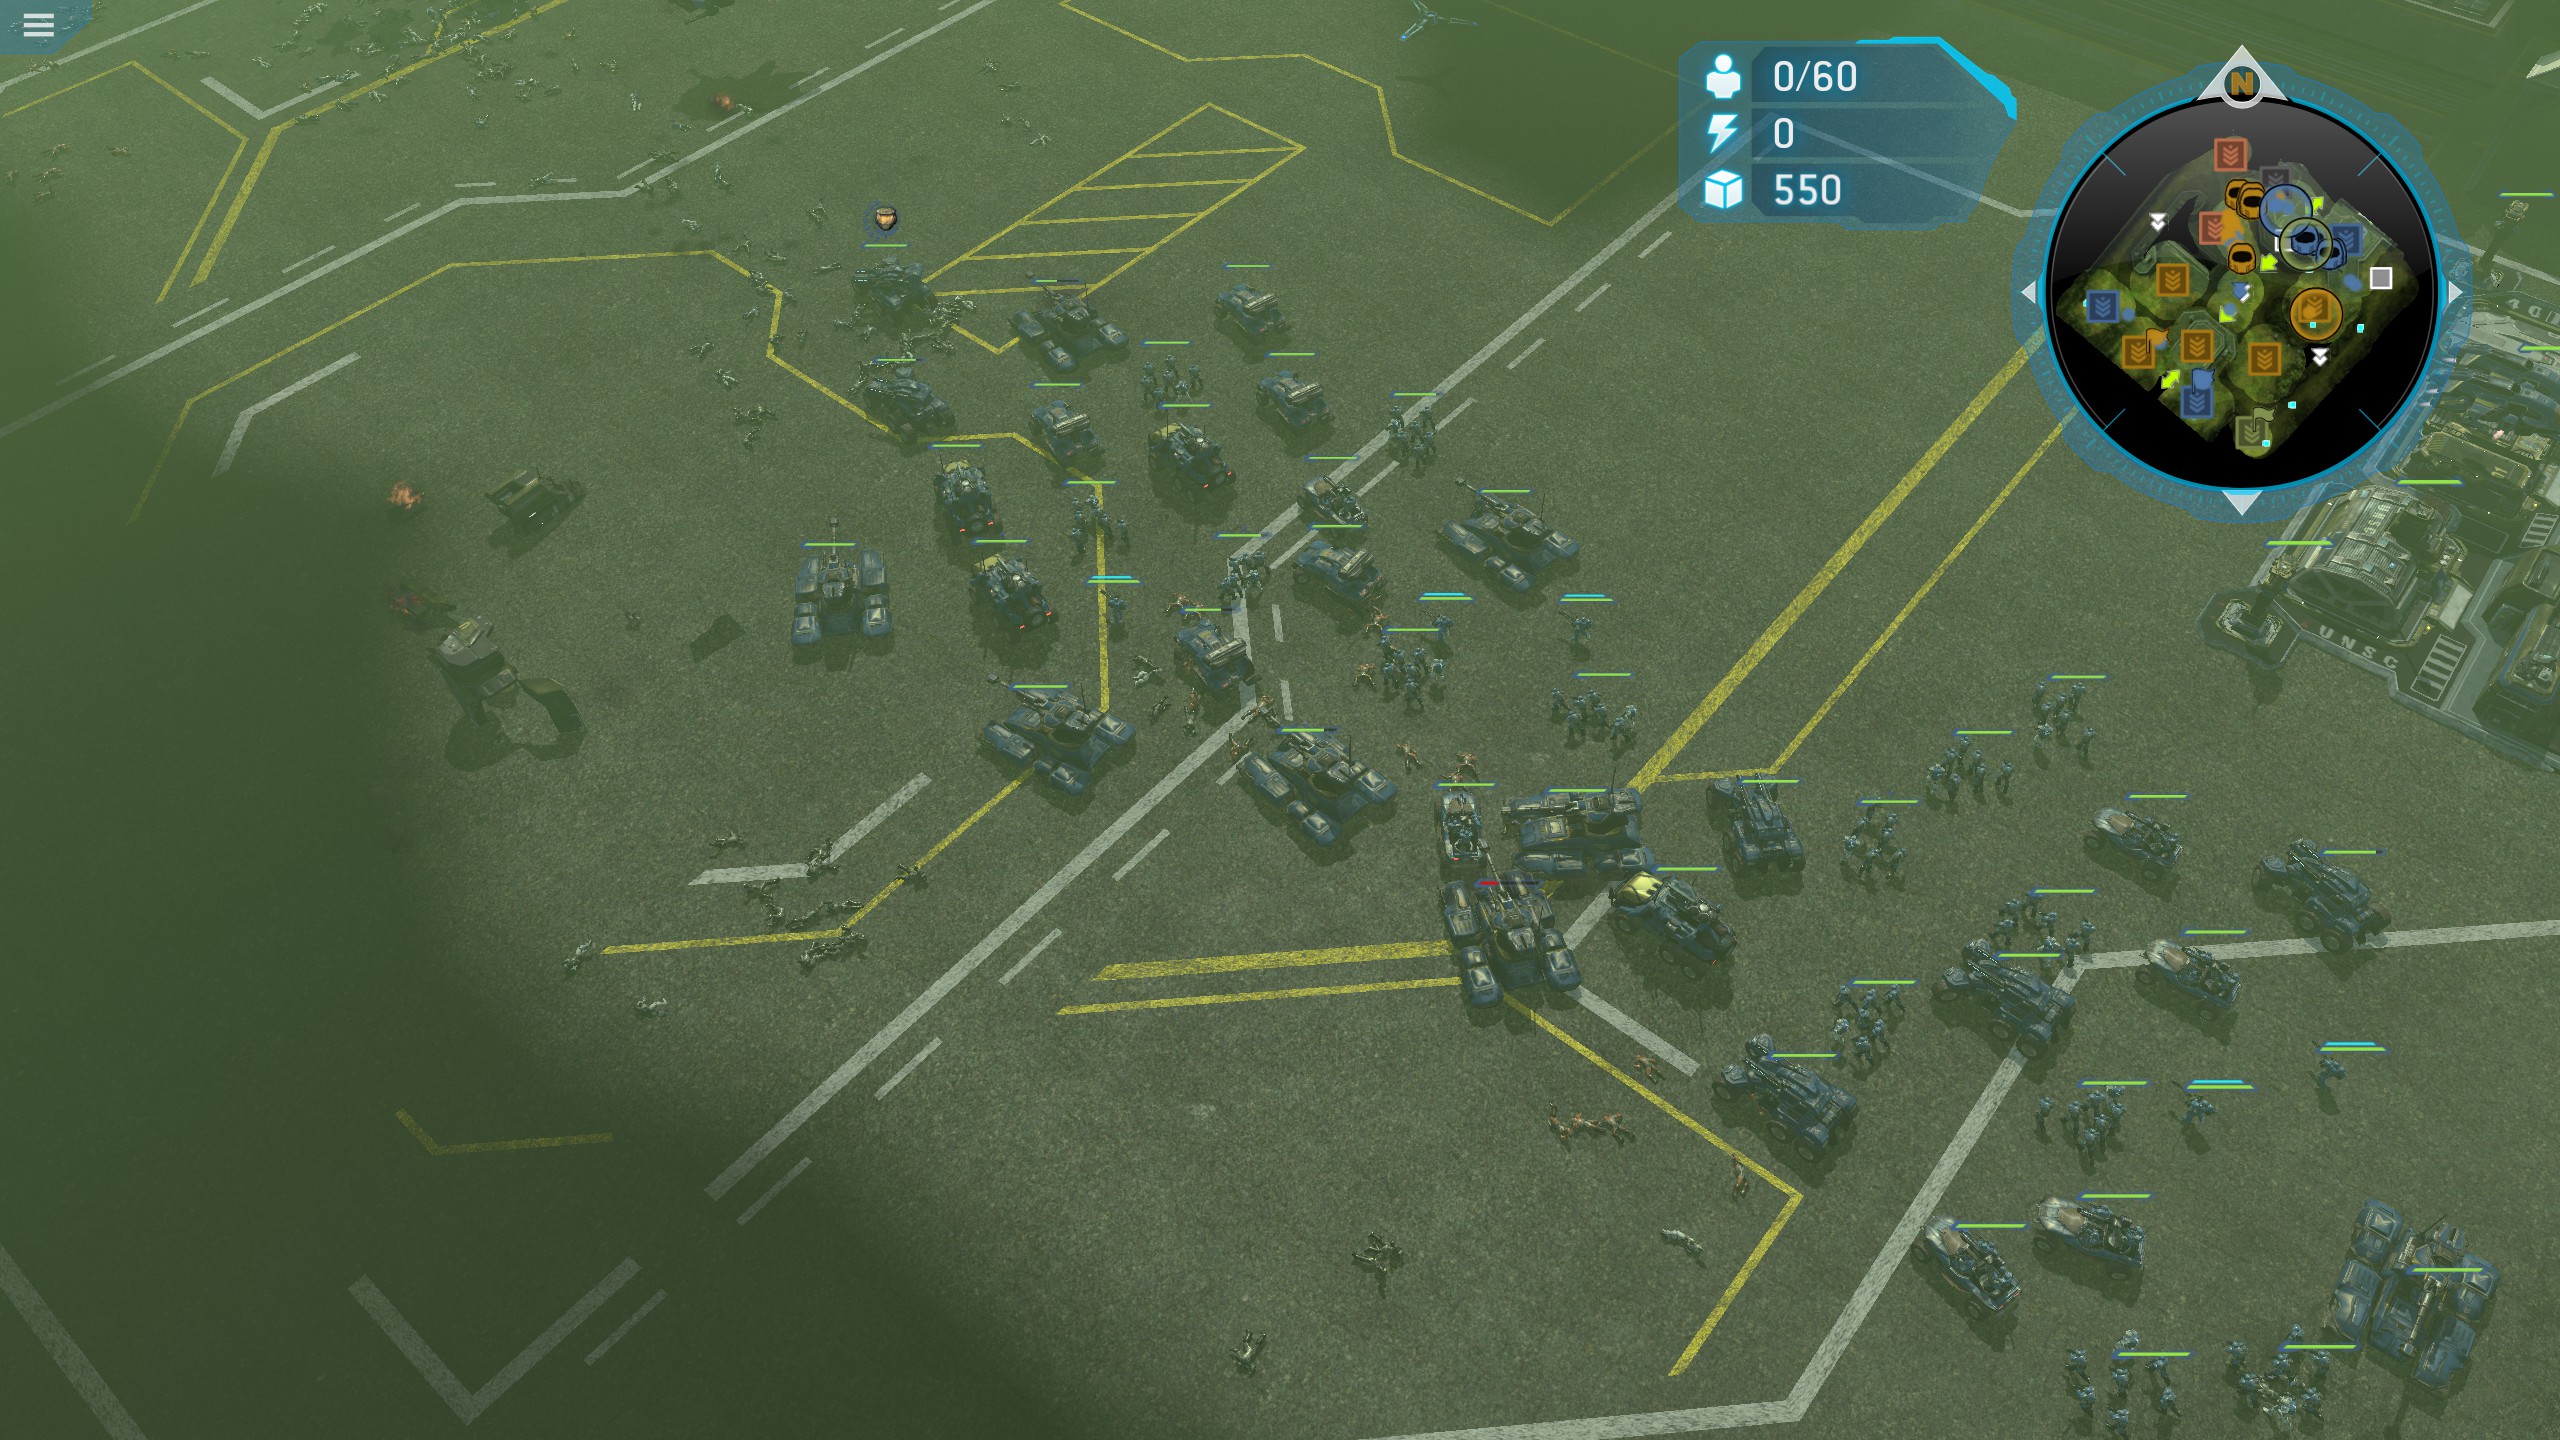 Halo Wars: Definitive Edition - Hardcore Mod Guide and Tips in 2021